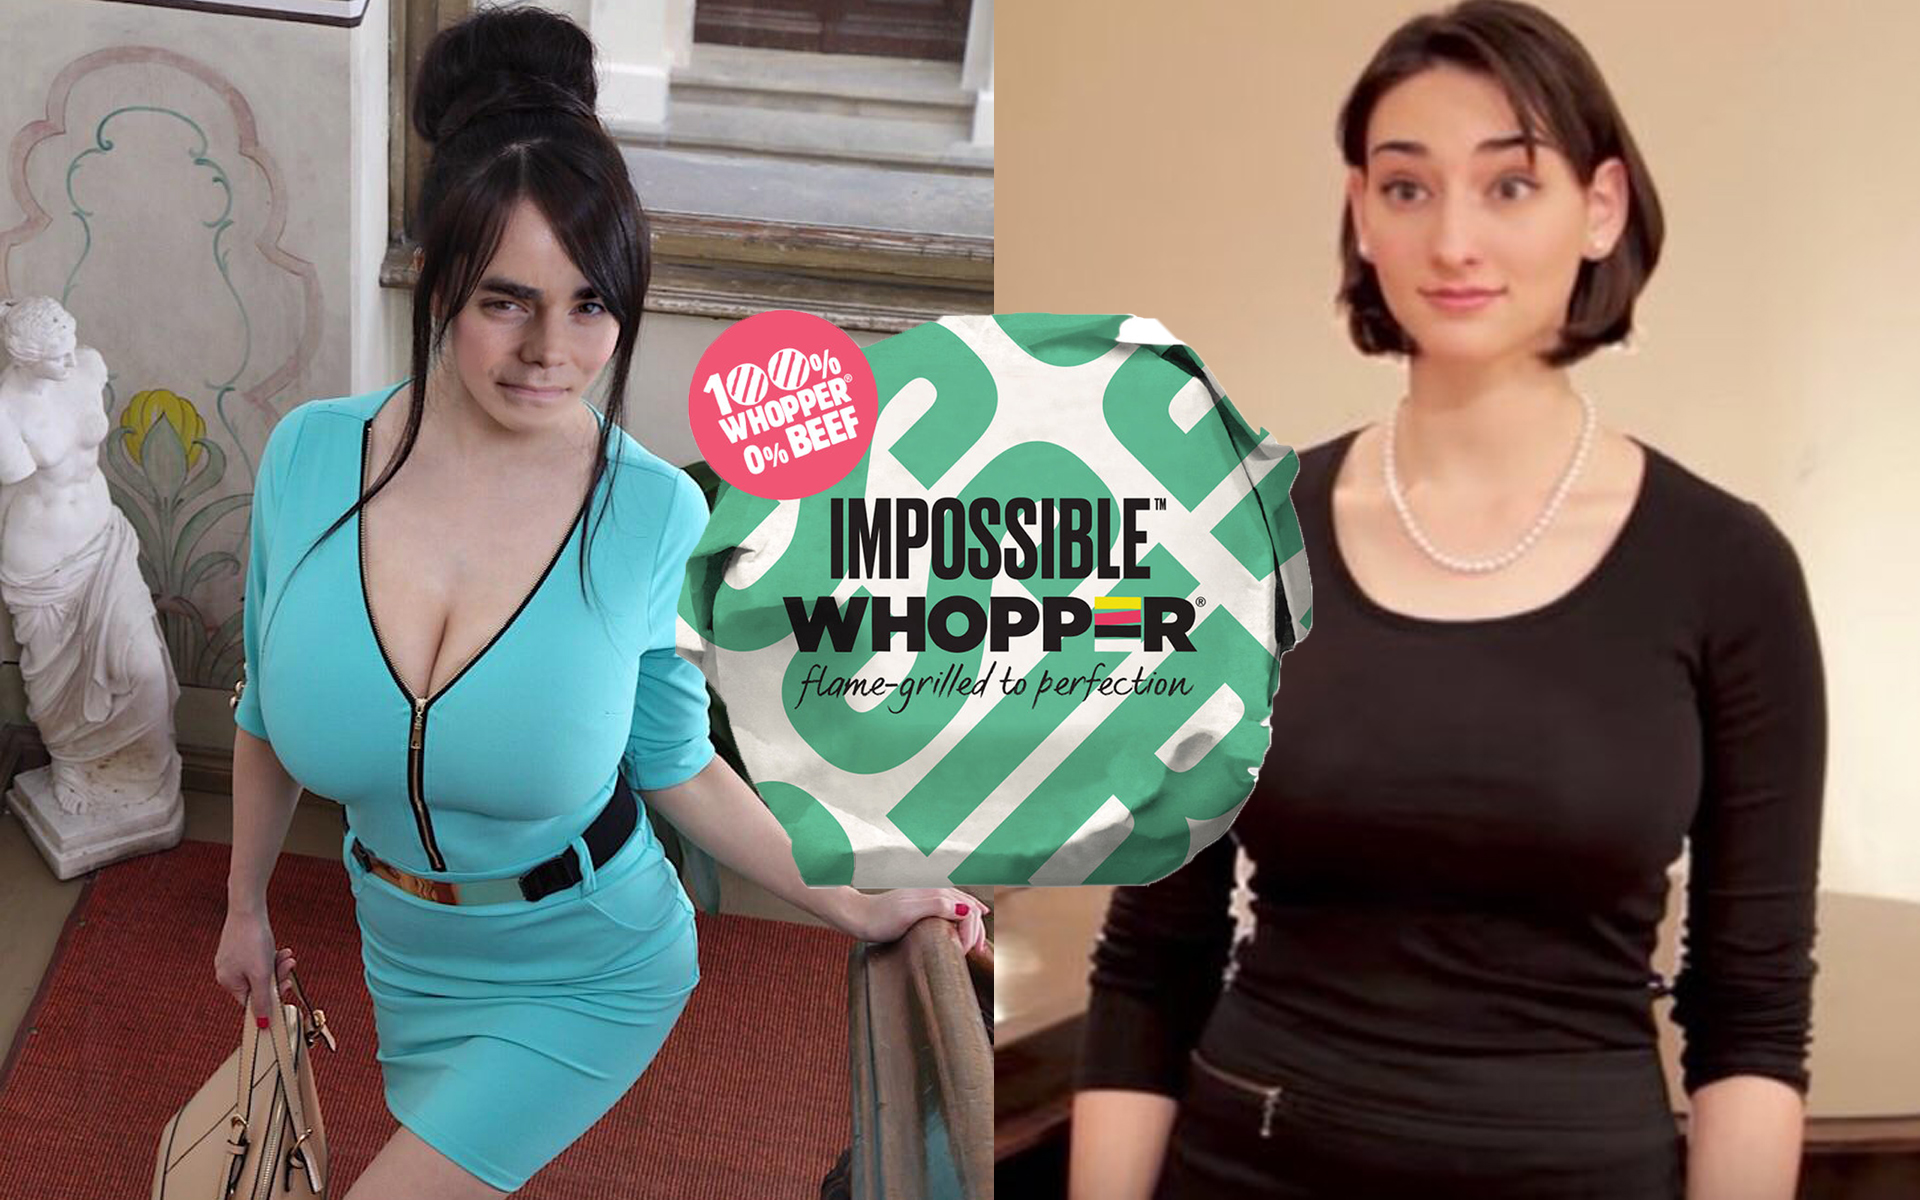 Ben Shapiro's Tits Now Rival Sister's After Stunning Impo...